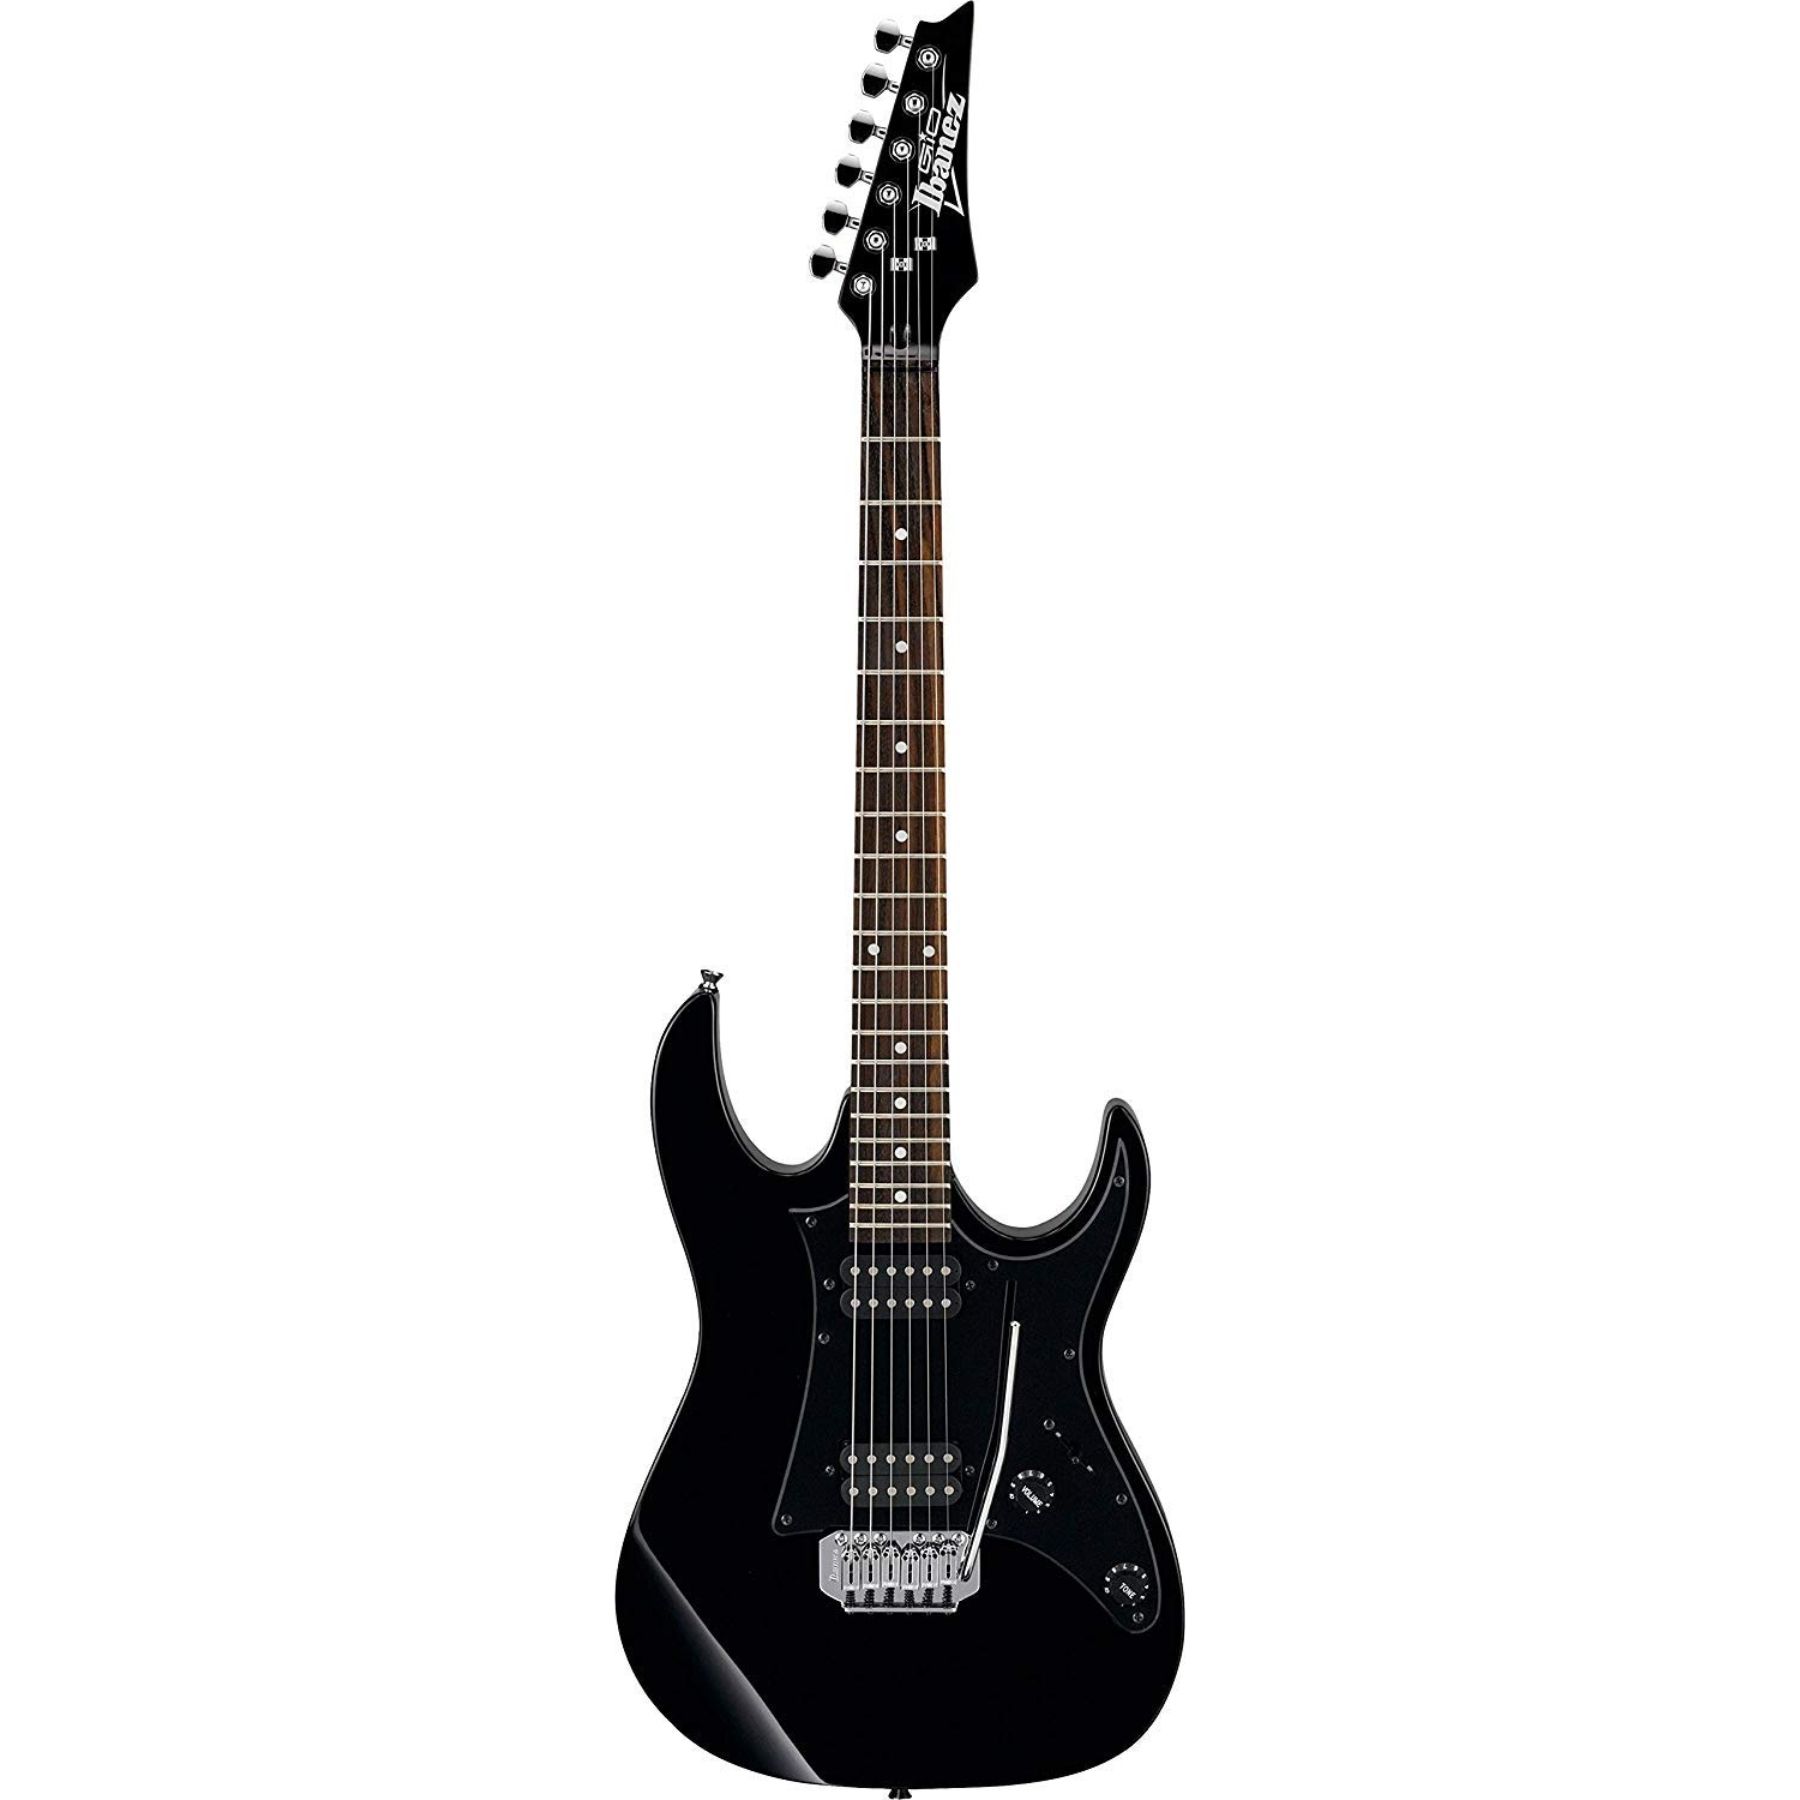 Ibanez GRX20 electric guitar online in India